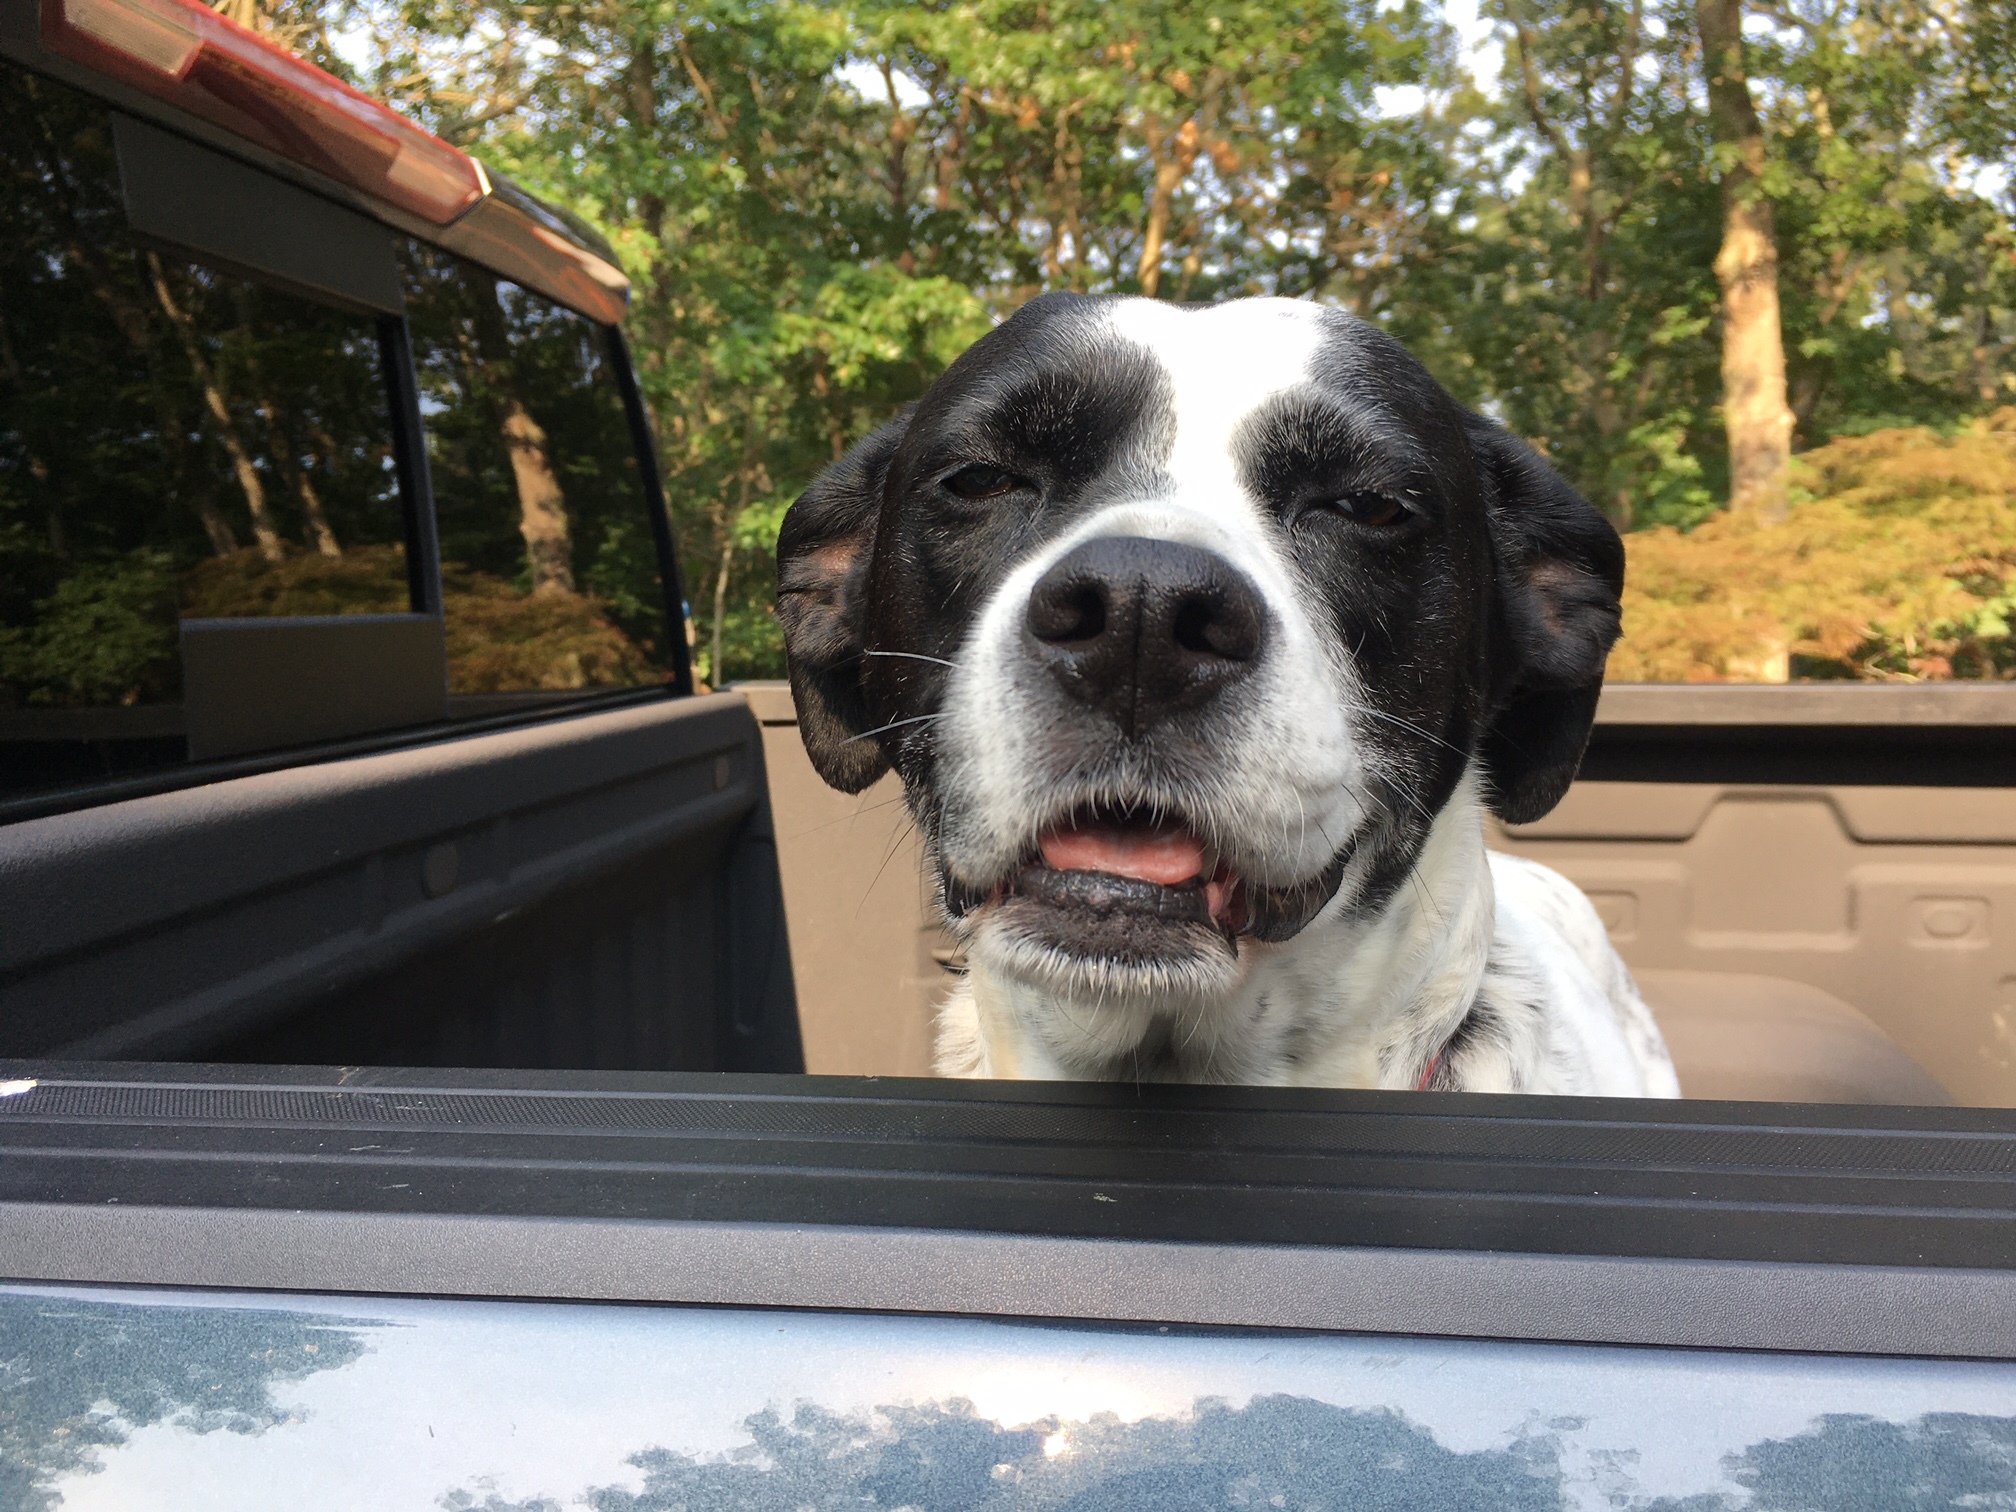 A new law would prohibit having a dog in the back of a pickup sans harness.